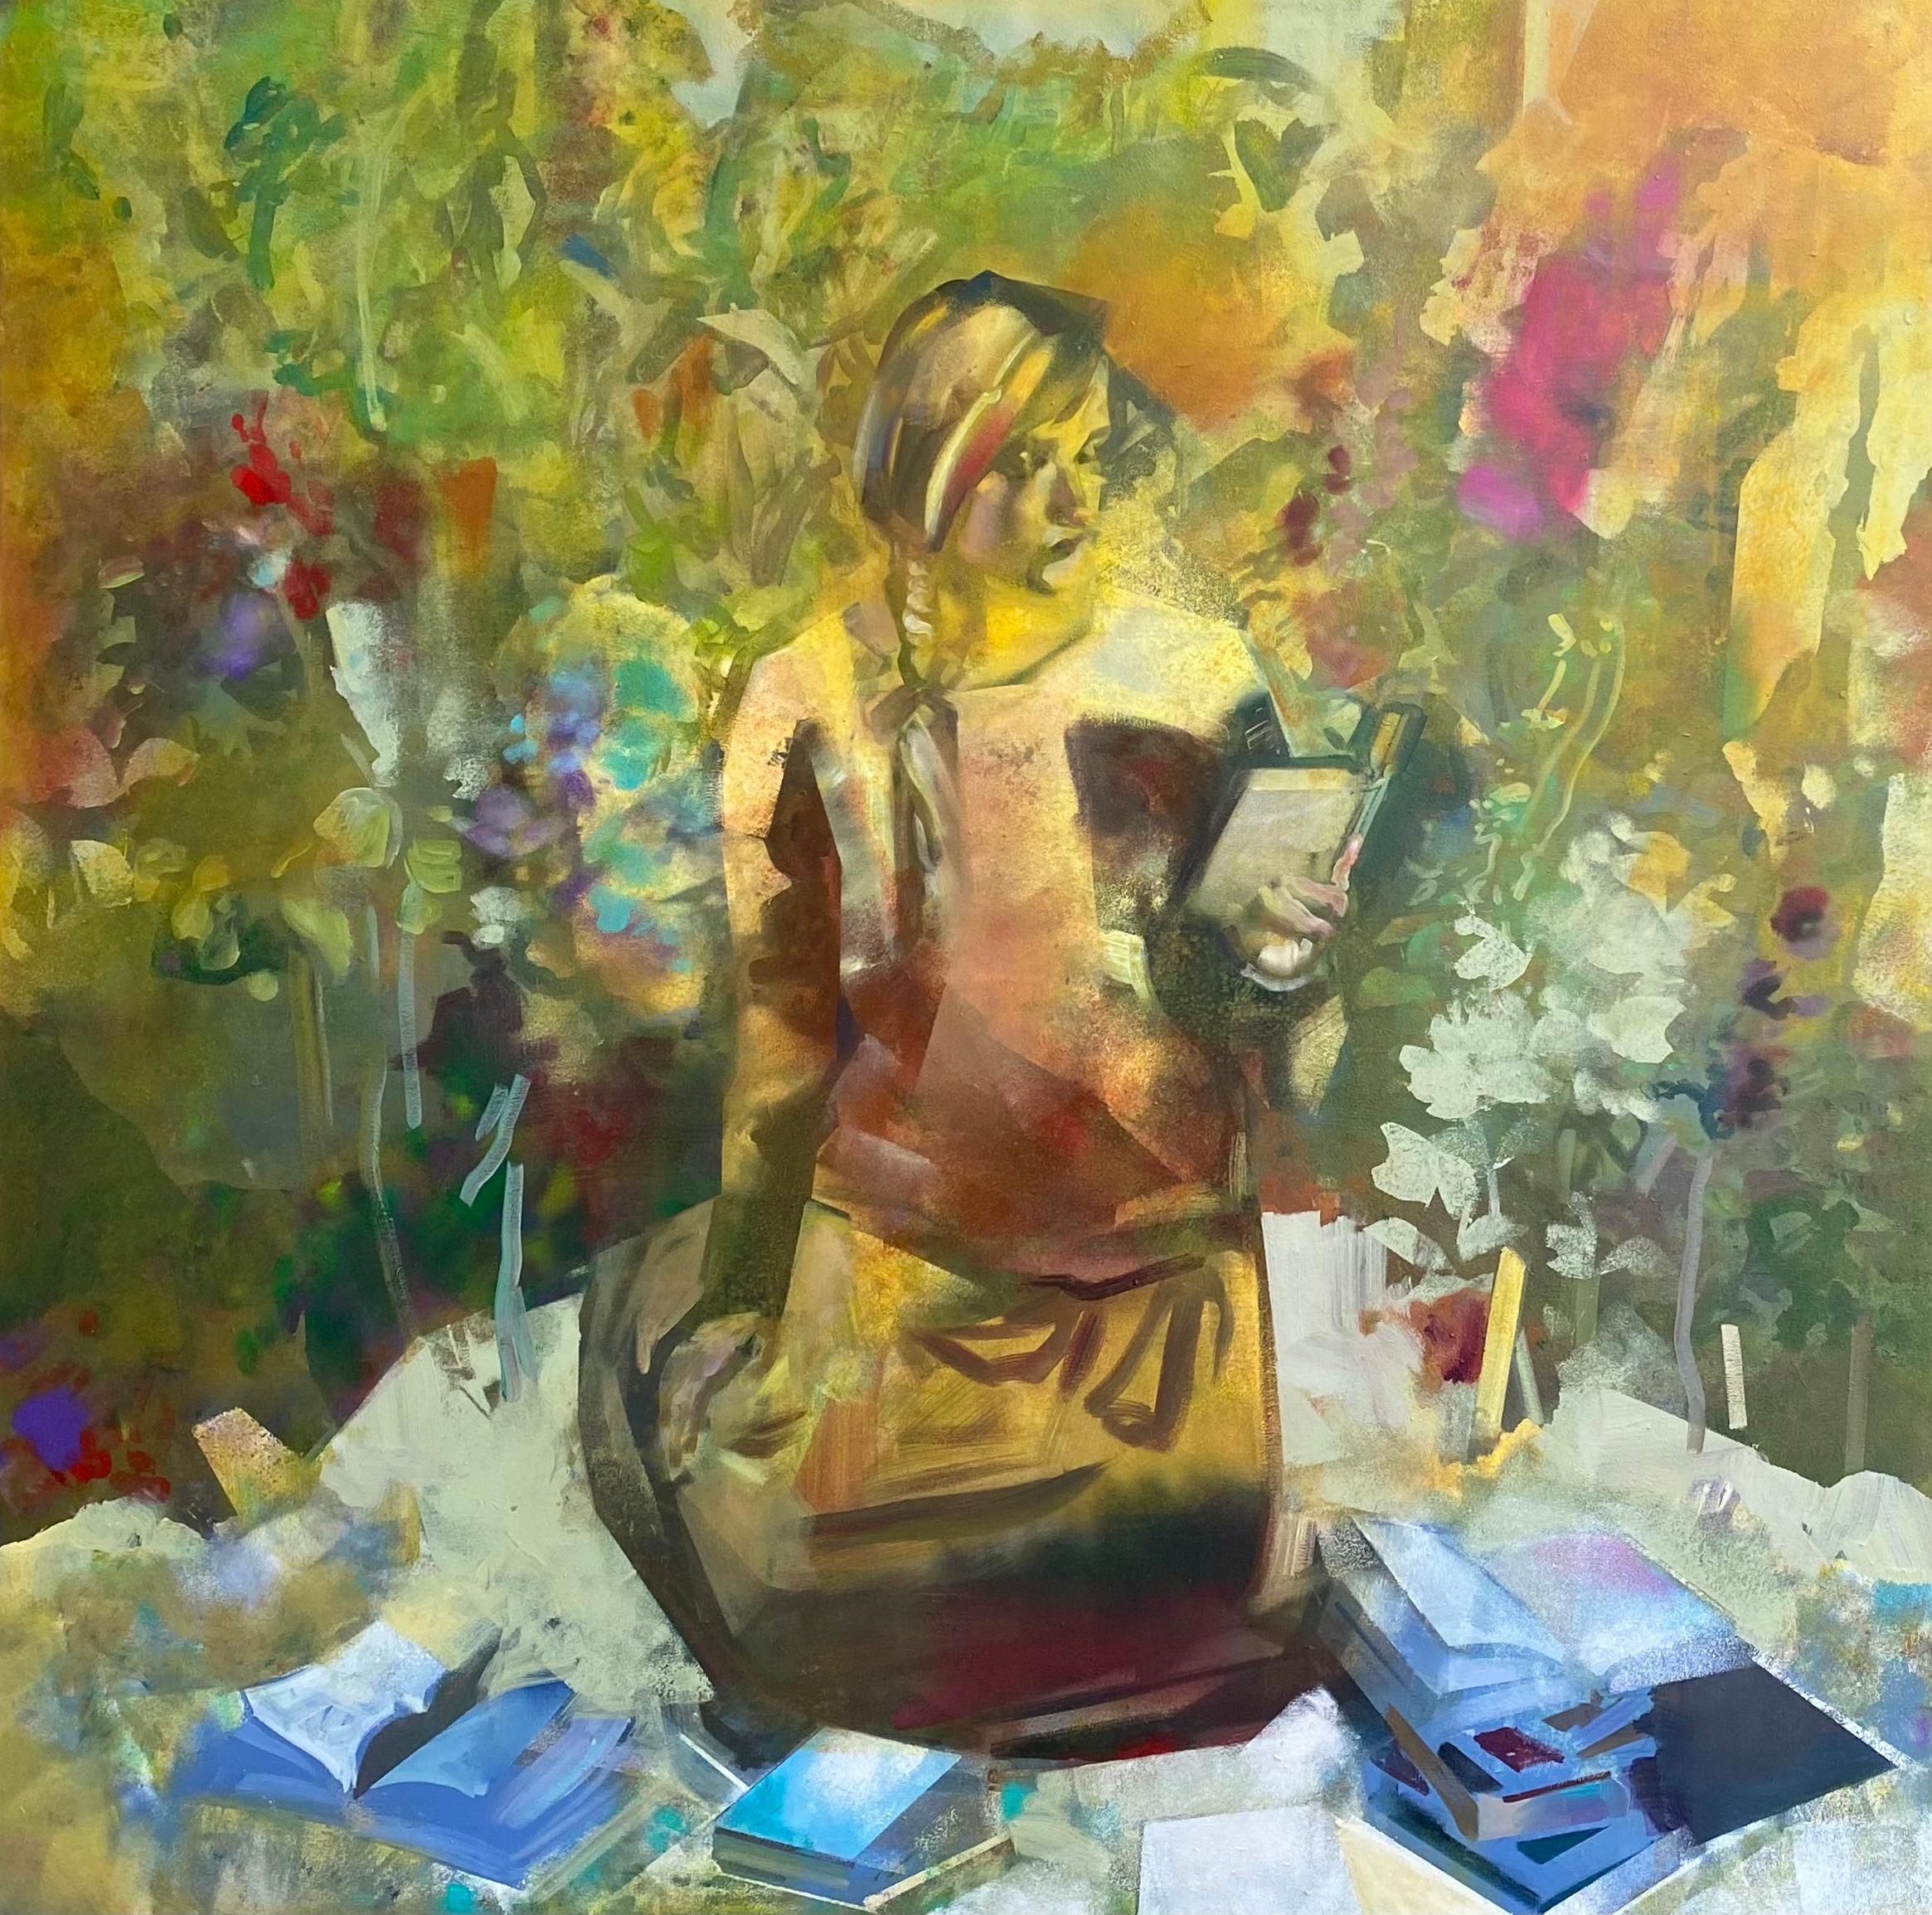 The well read girl, reading- 21st Century Contemporary Figure Painting 